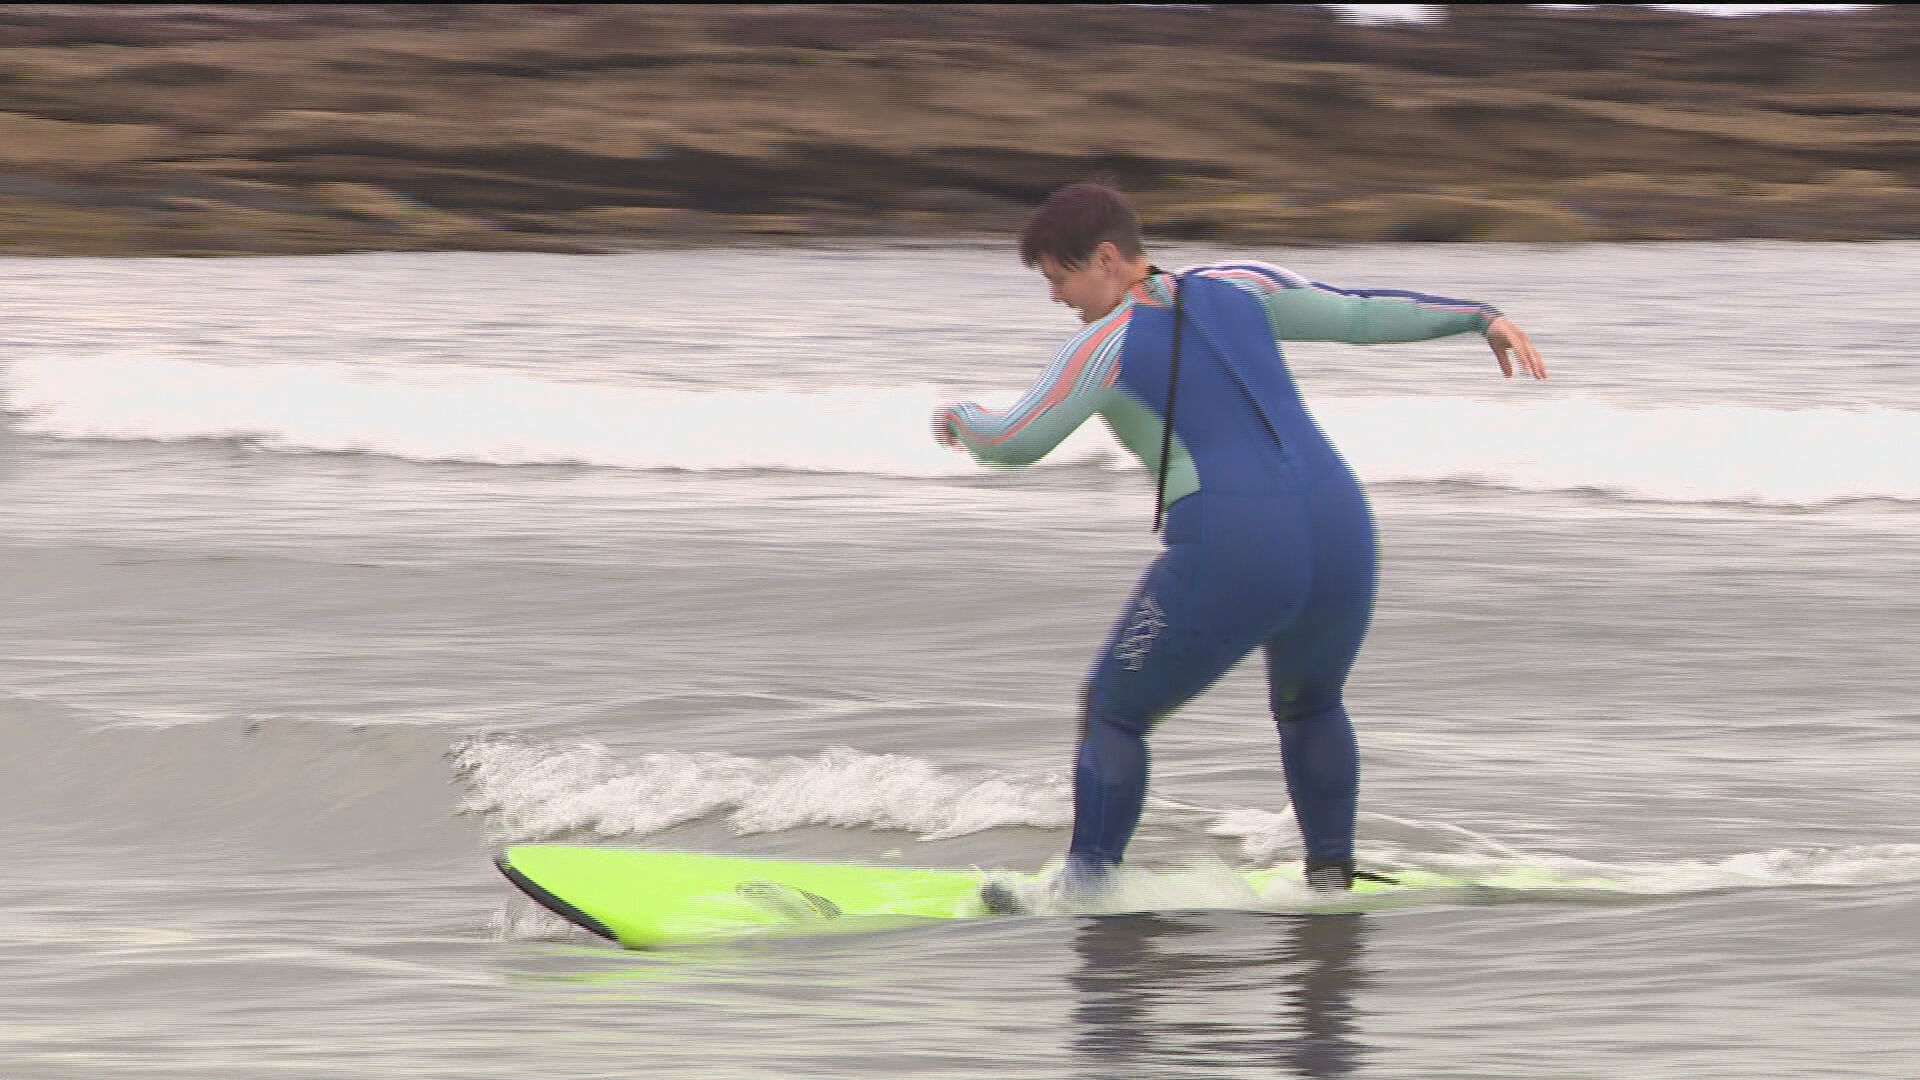 Emma Maguire said surfing helps 'clear her head'